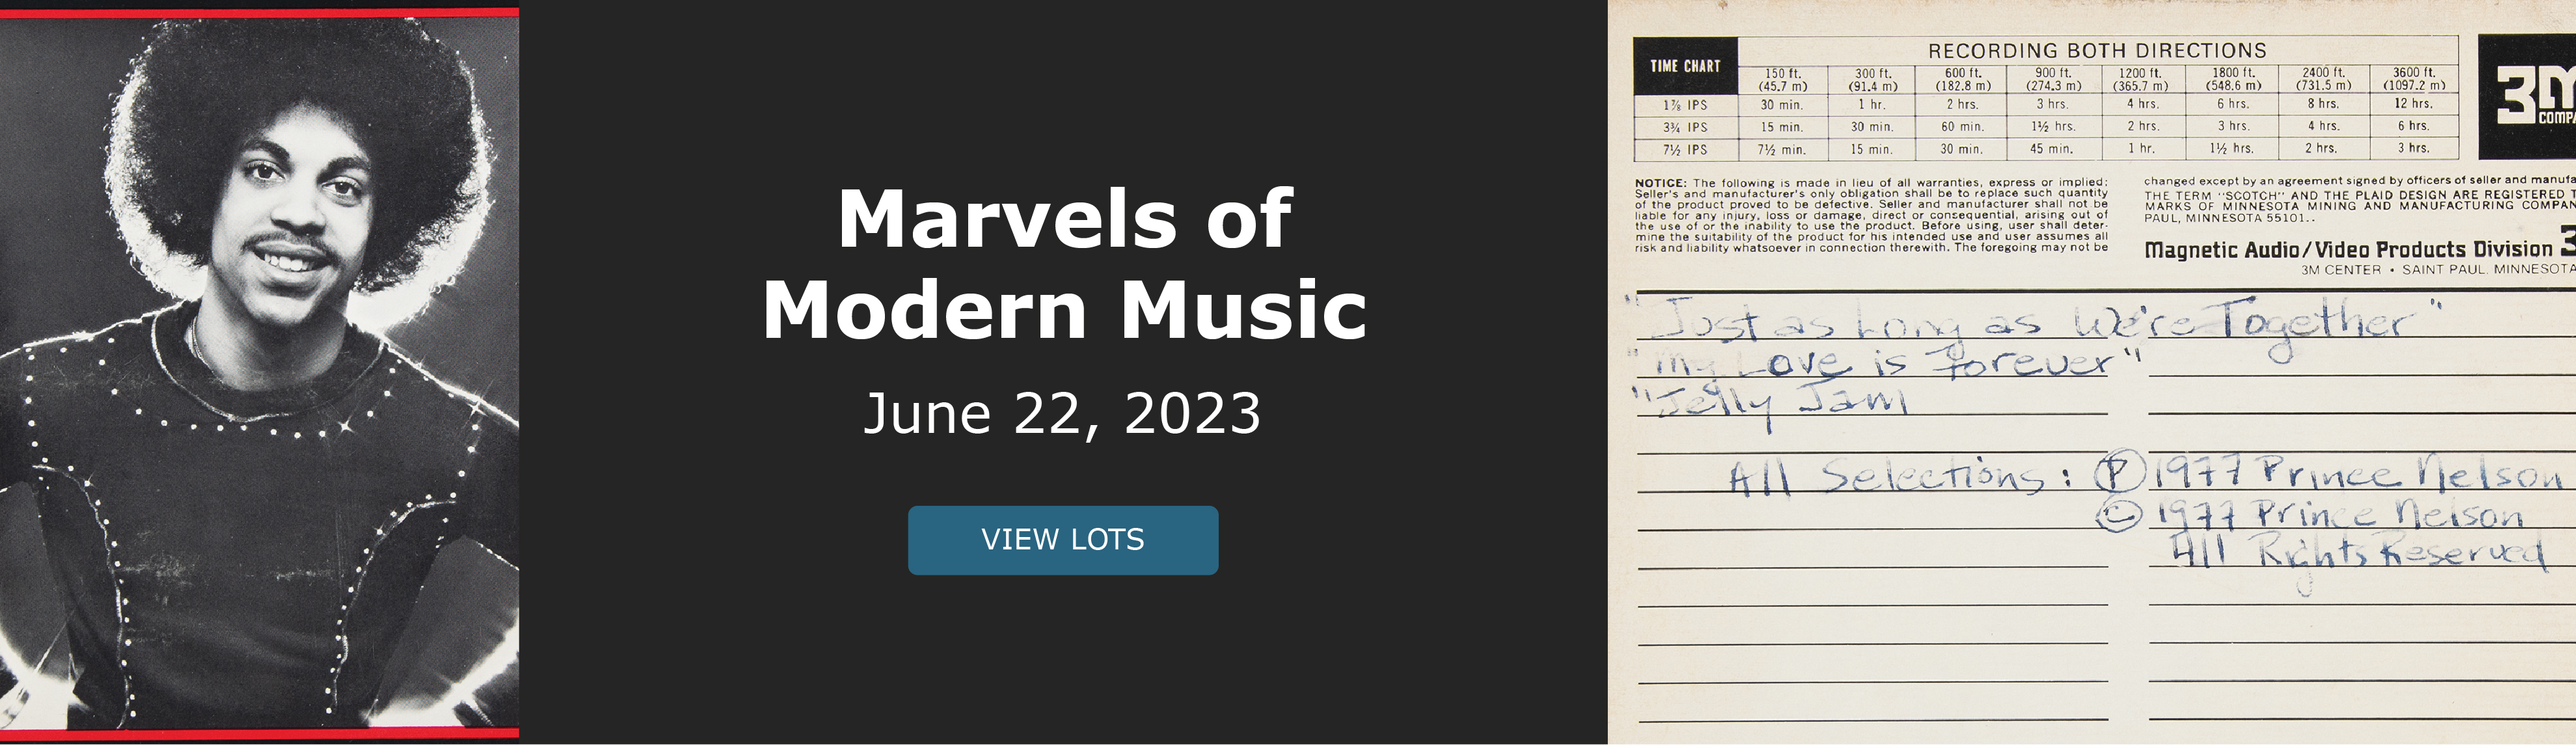 Marvels of Modern Music! Bidding ends June 22, 2023. View Lots!